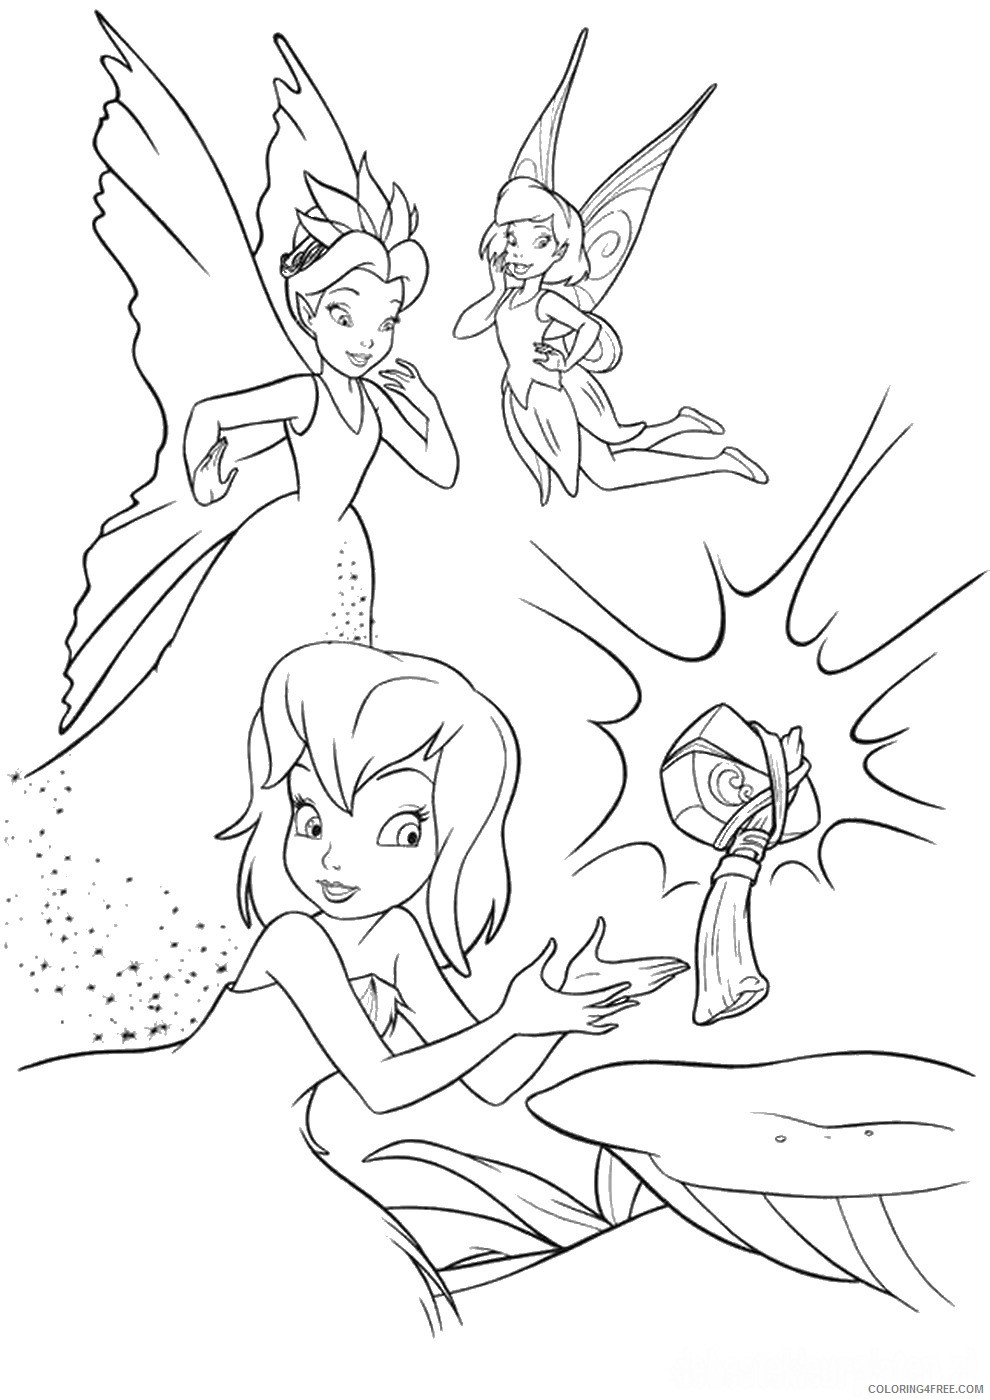 Tinker Bell Coloring Pages Cartoons tinkerbell_cl_14 Printable 2020 6621 Coloring4free